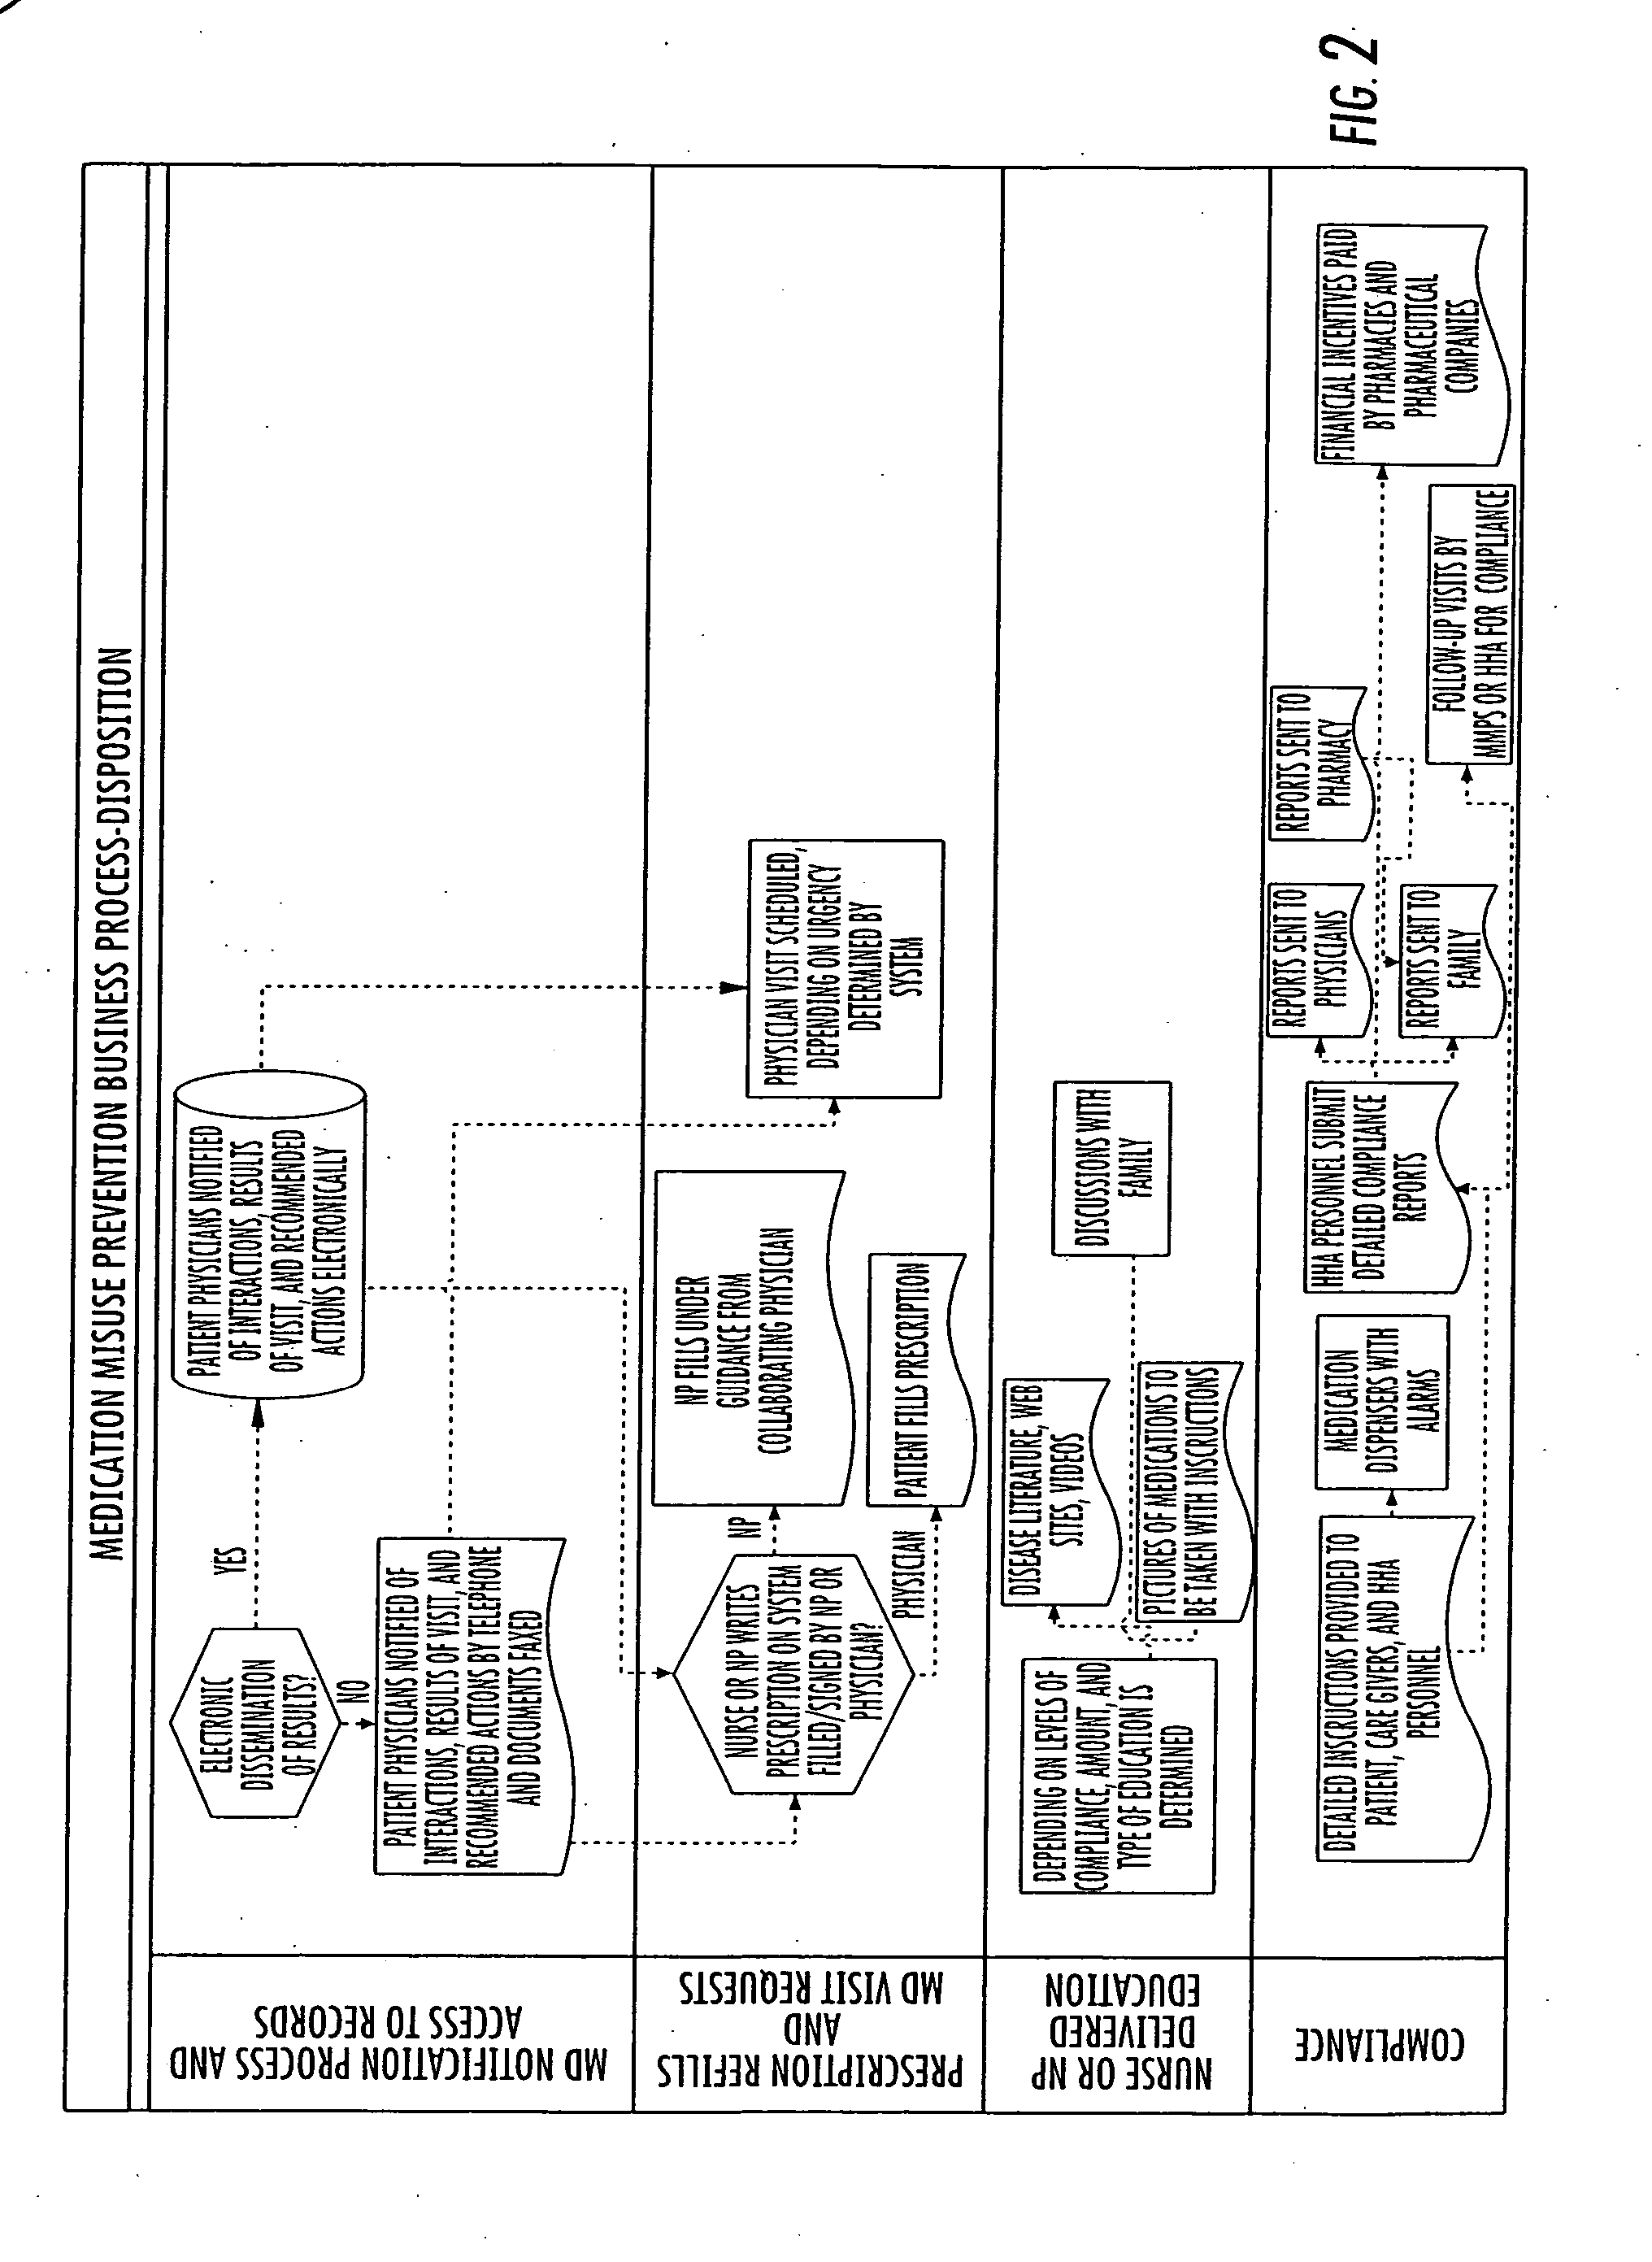 System and method for medication misuse prevention